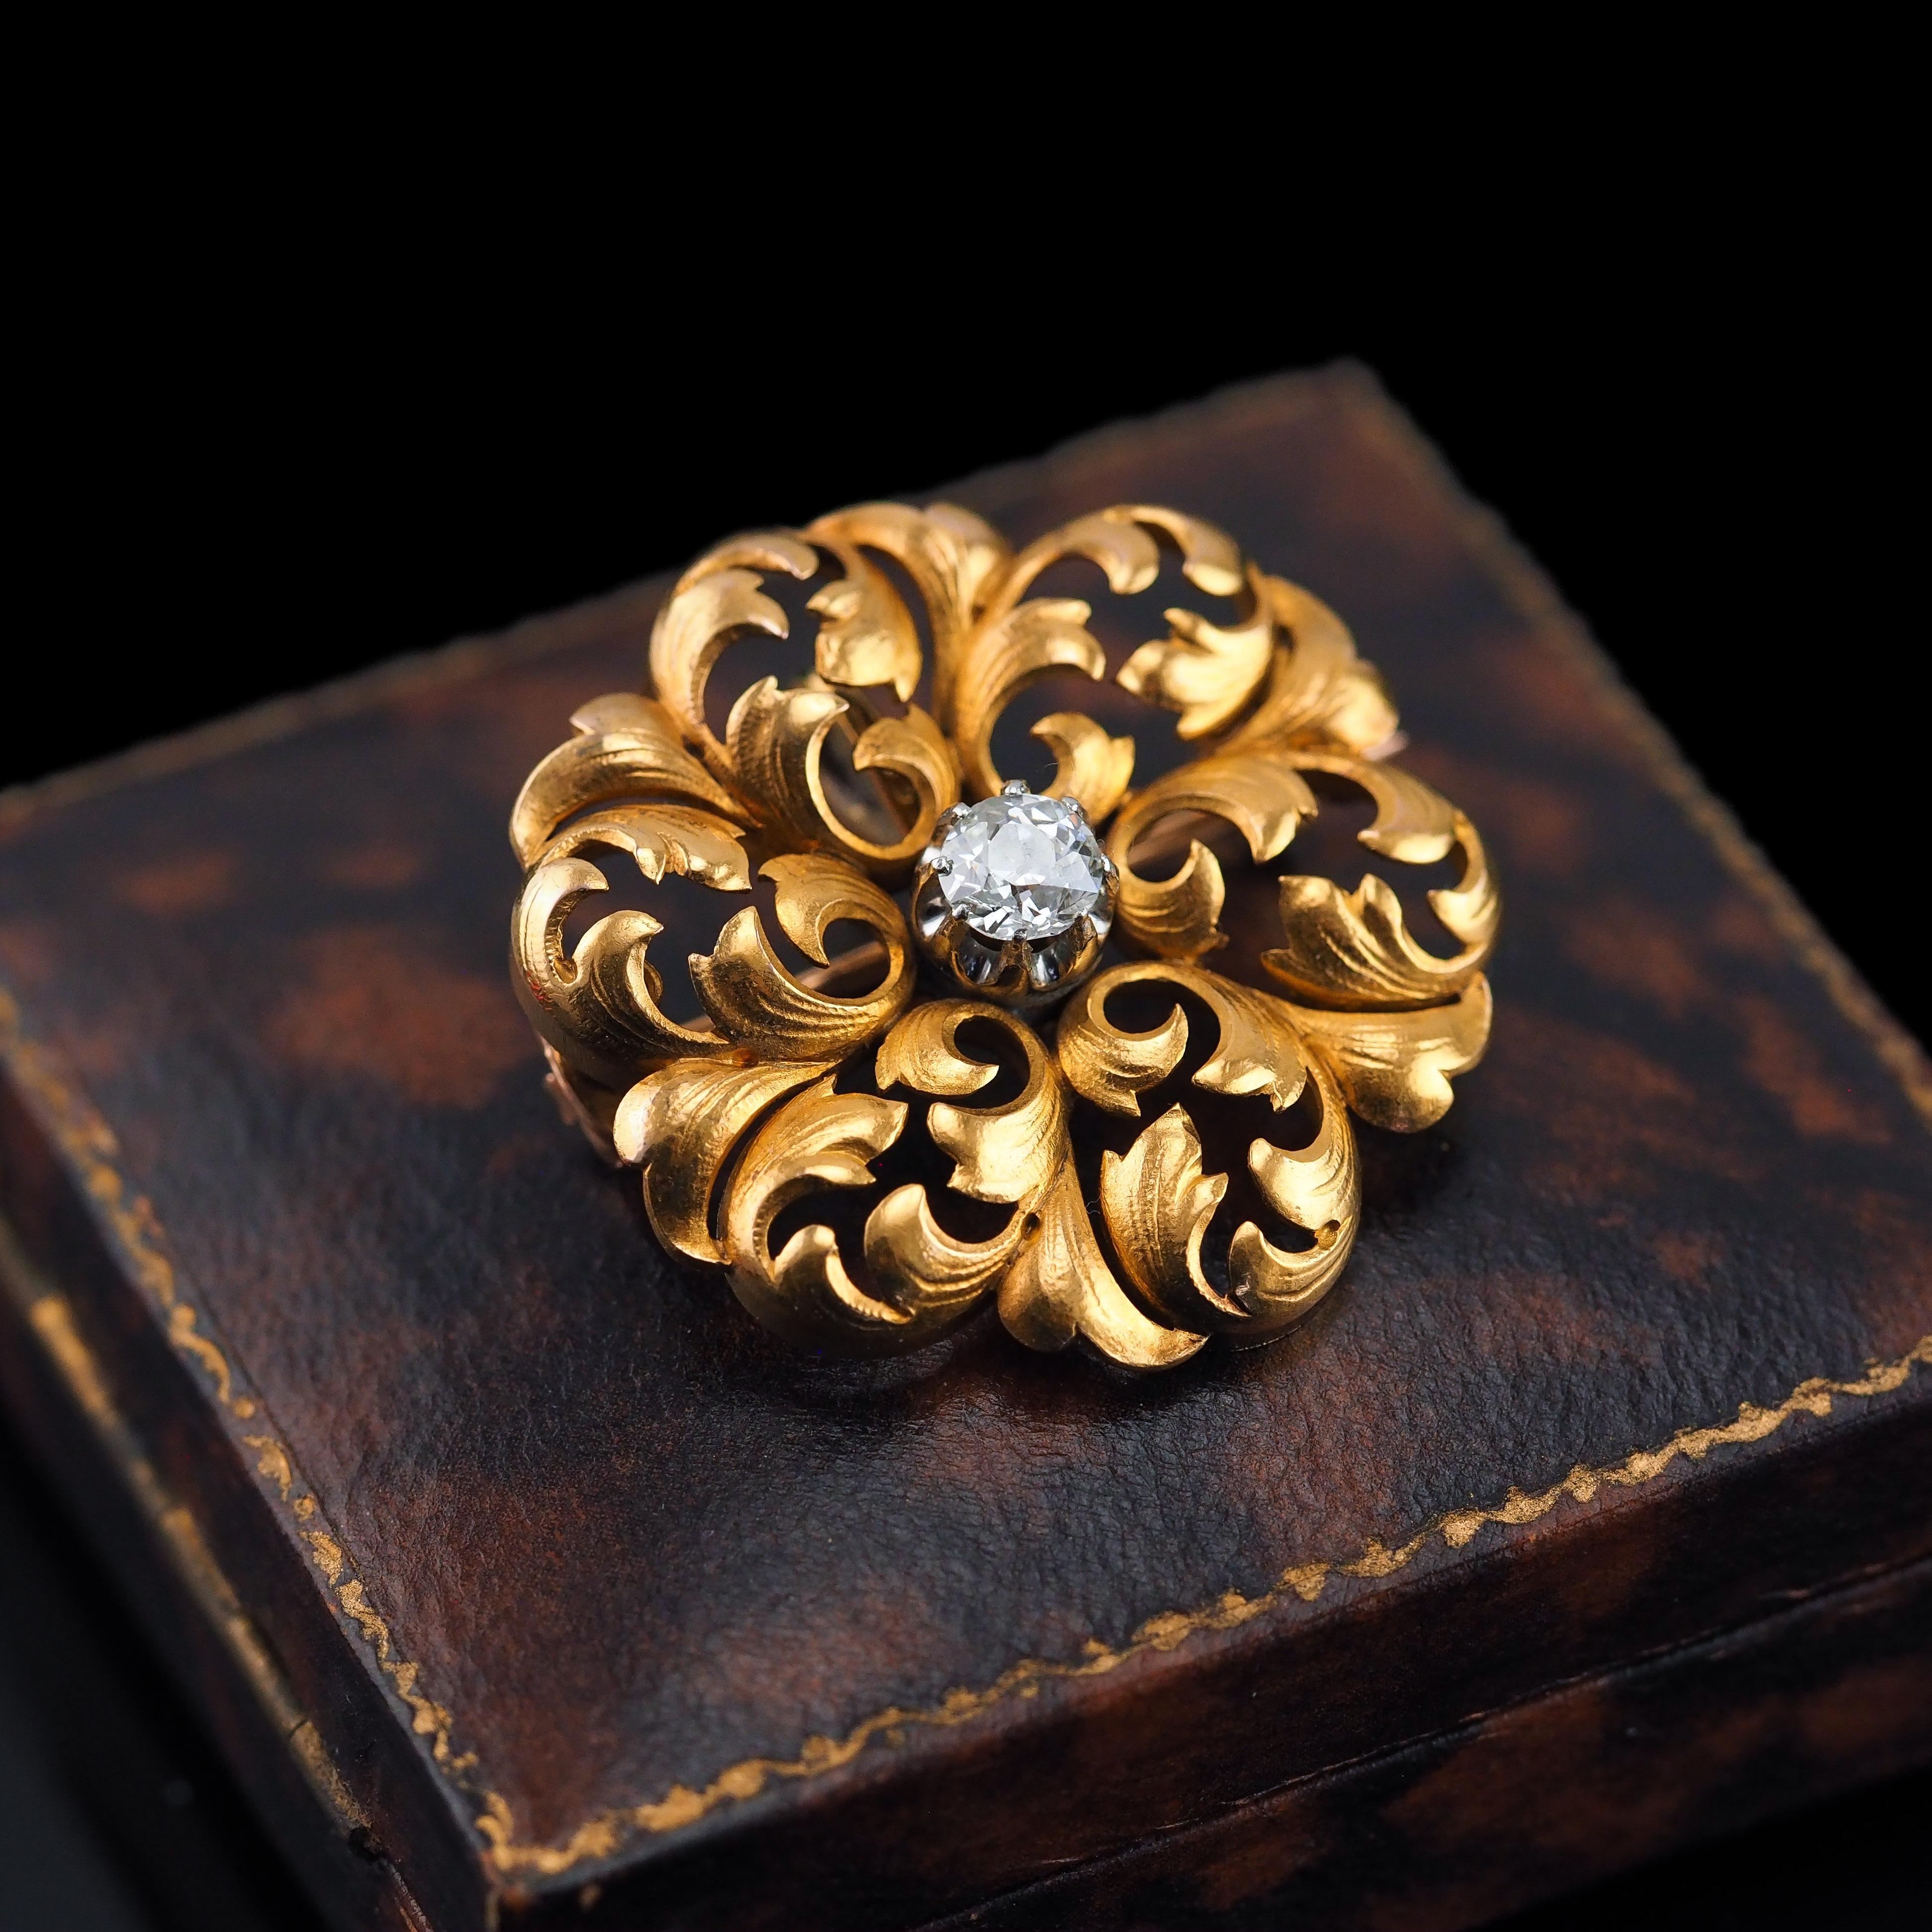 Antique French Diamond Necklace 18K Gold Pendant Brooch 19th C. Flower Acanthus For Sale 9